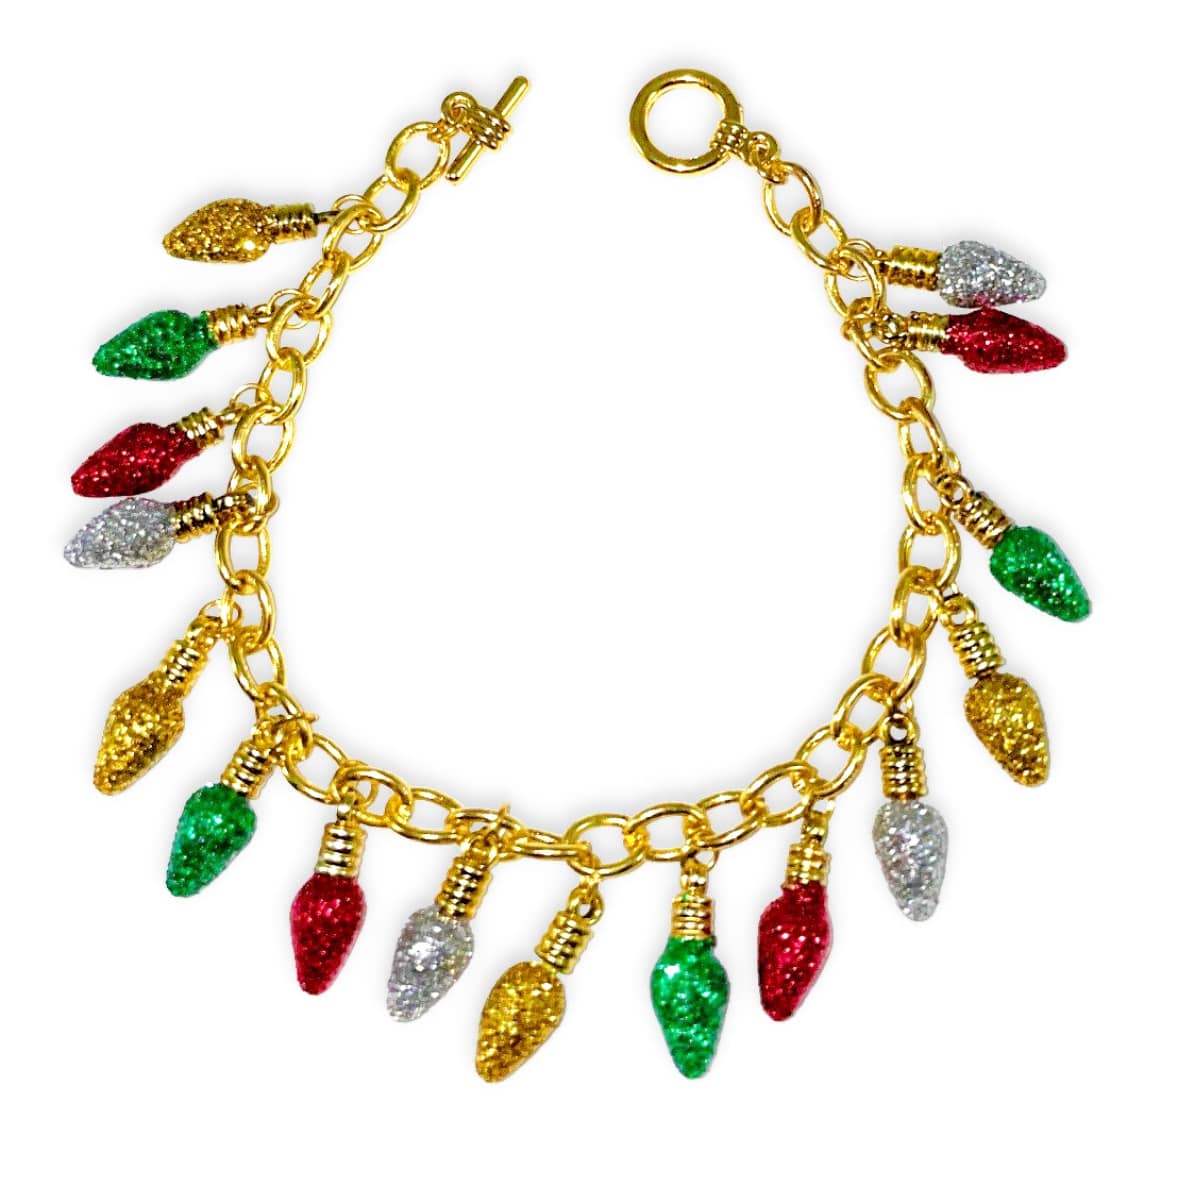 dainty gold bracelet with christmas light bulb charms covered in red, yellow, green & white glitter - Santaland